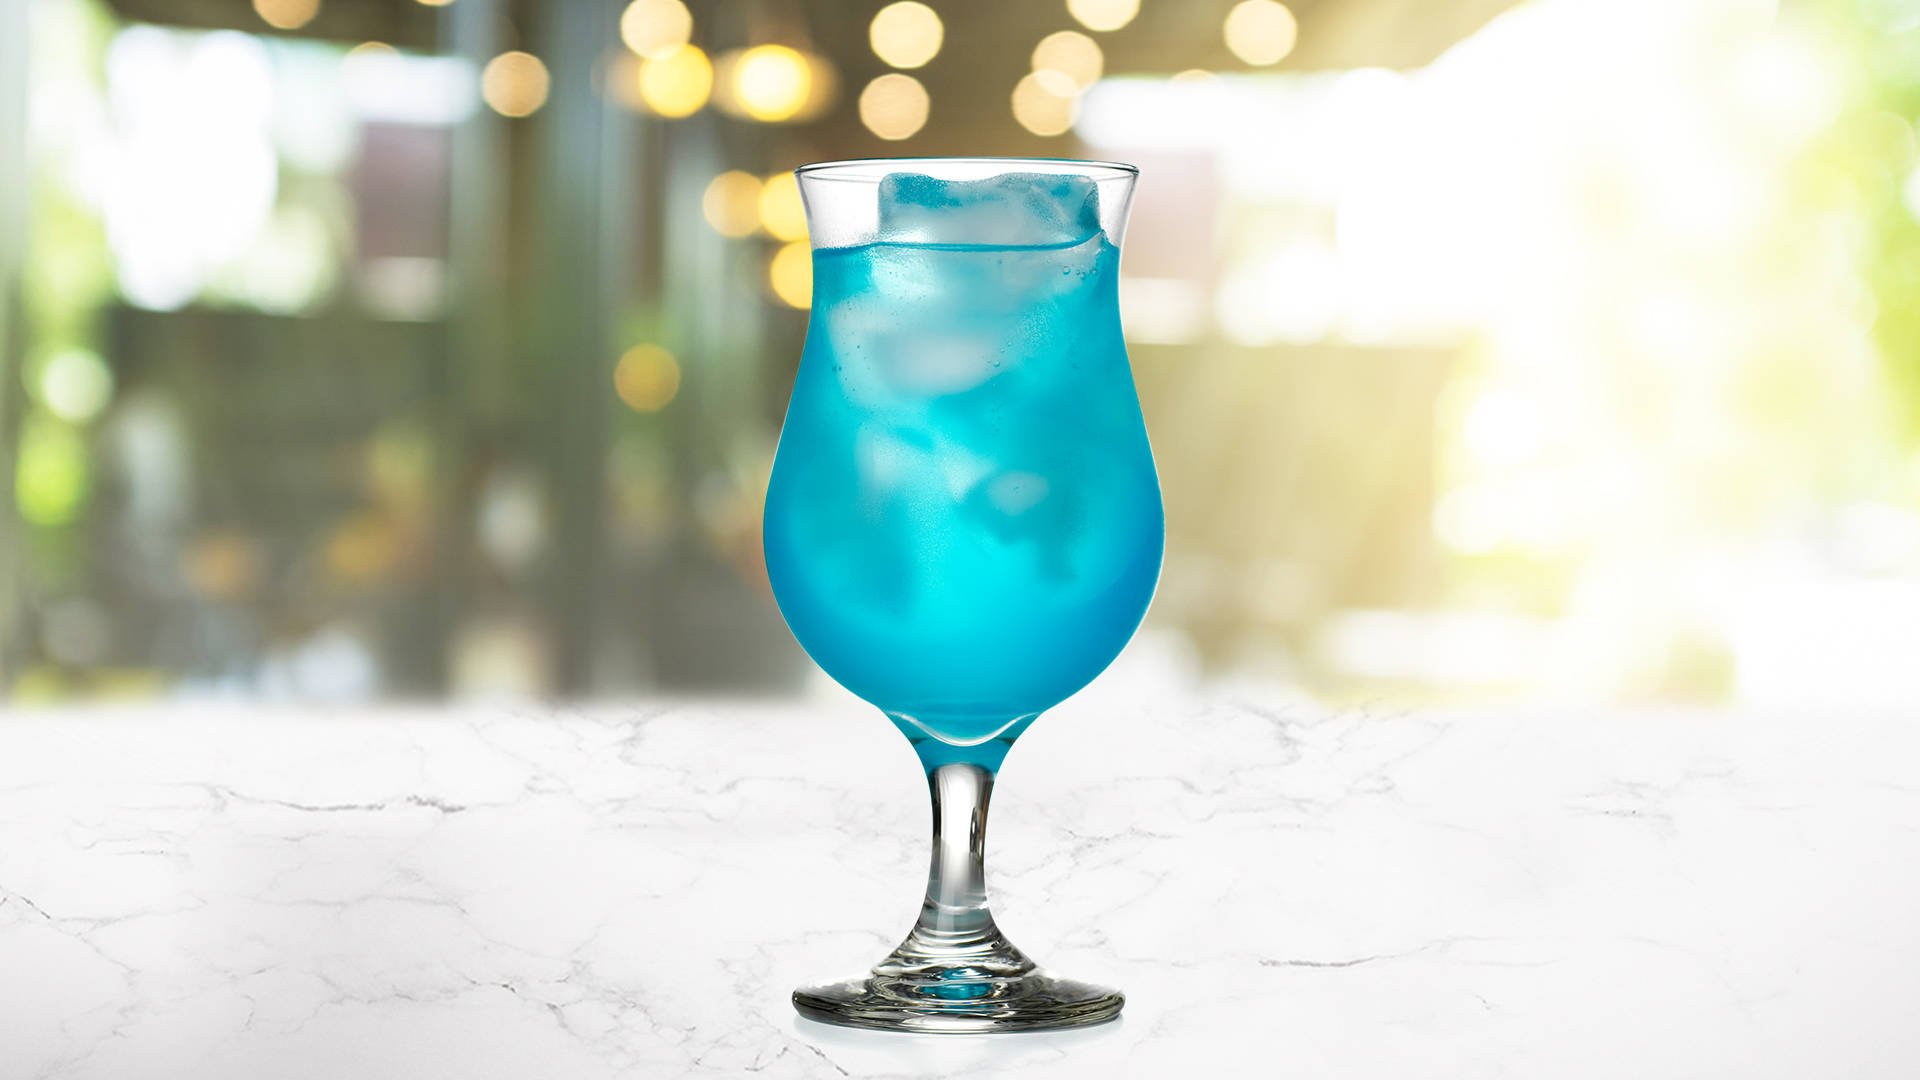 Glass of Blue Star on a marble surface